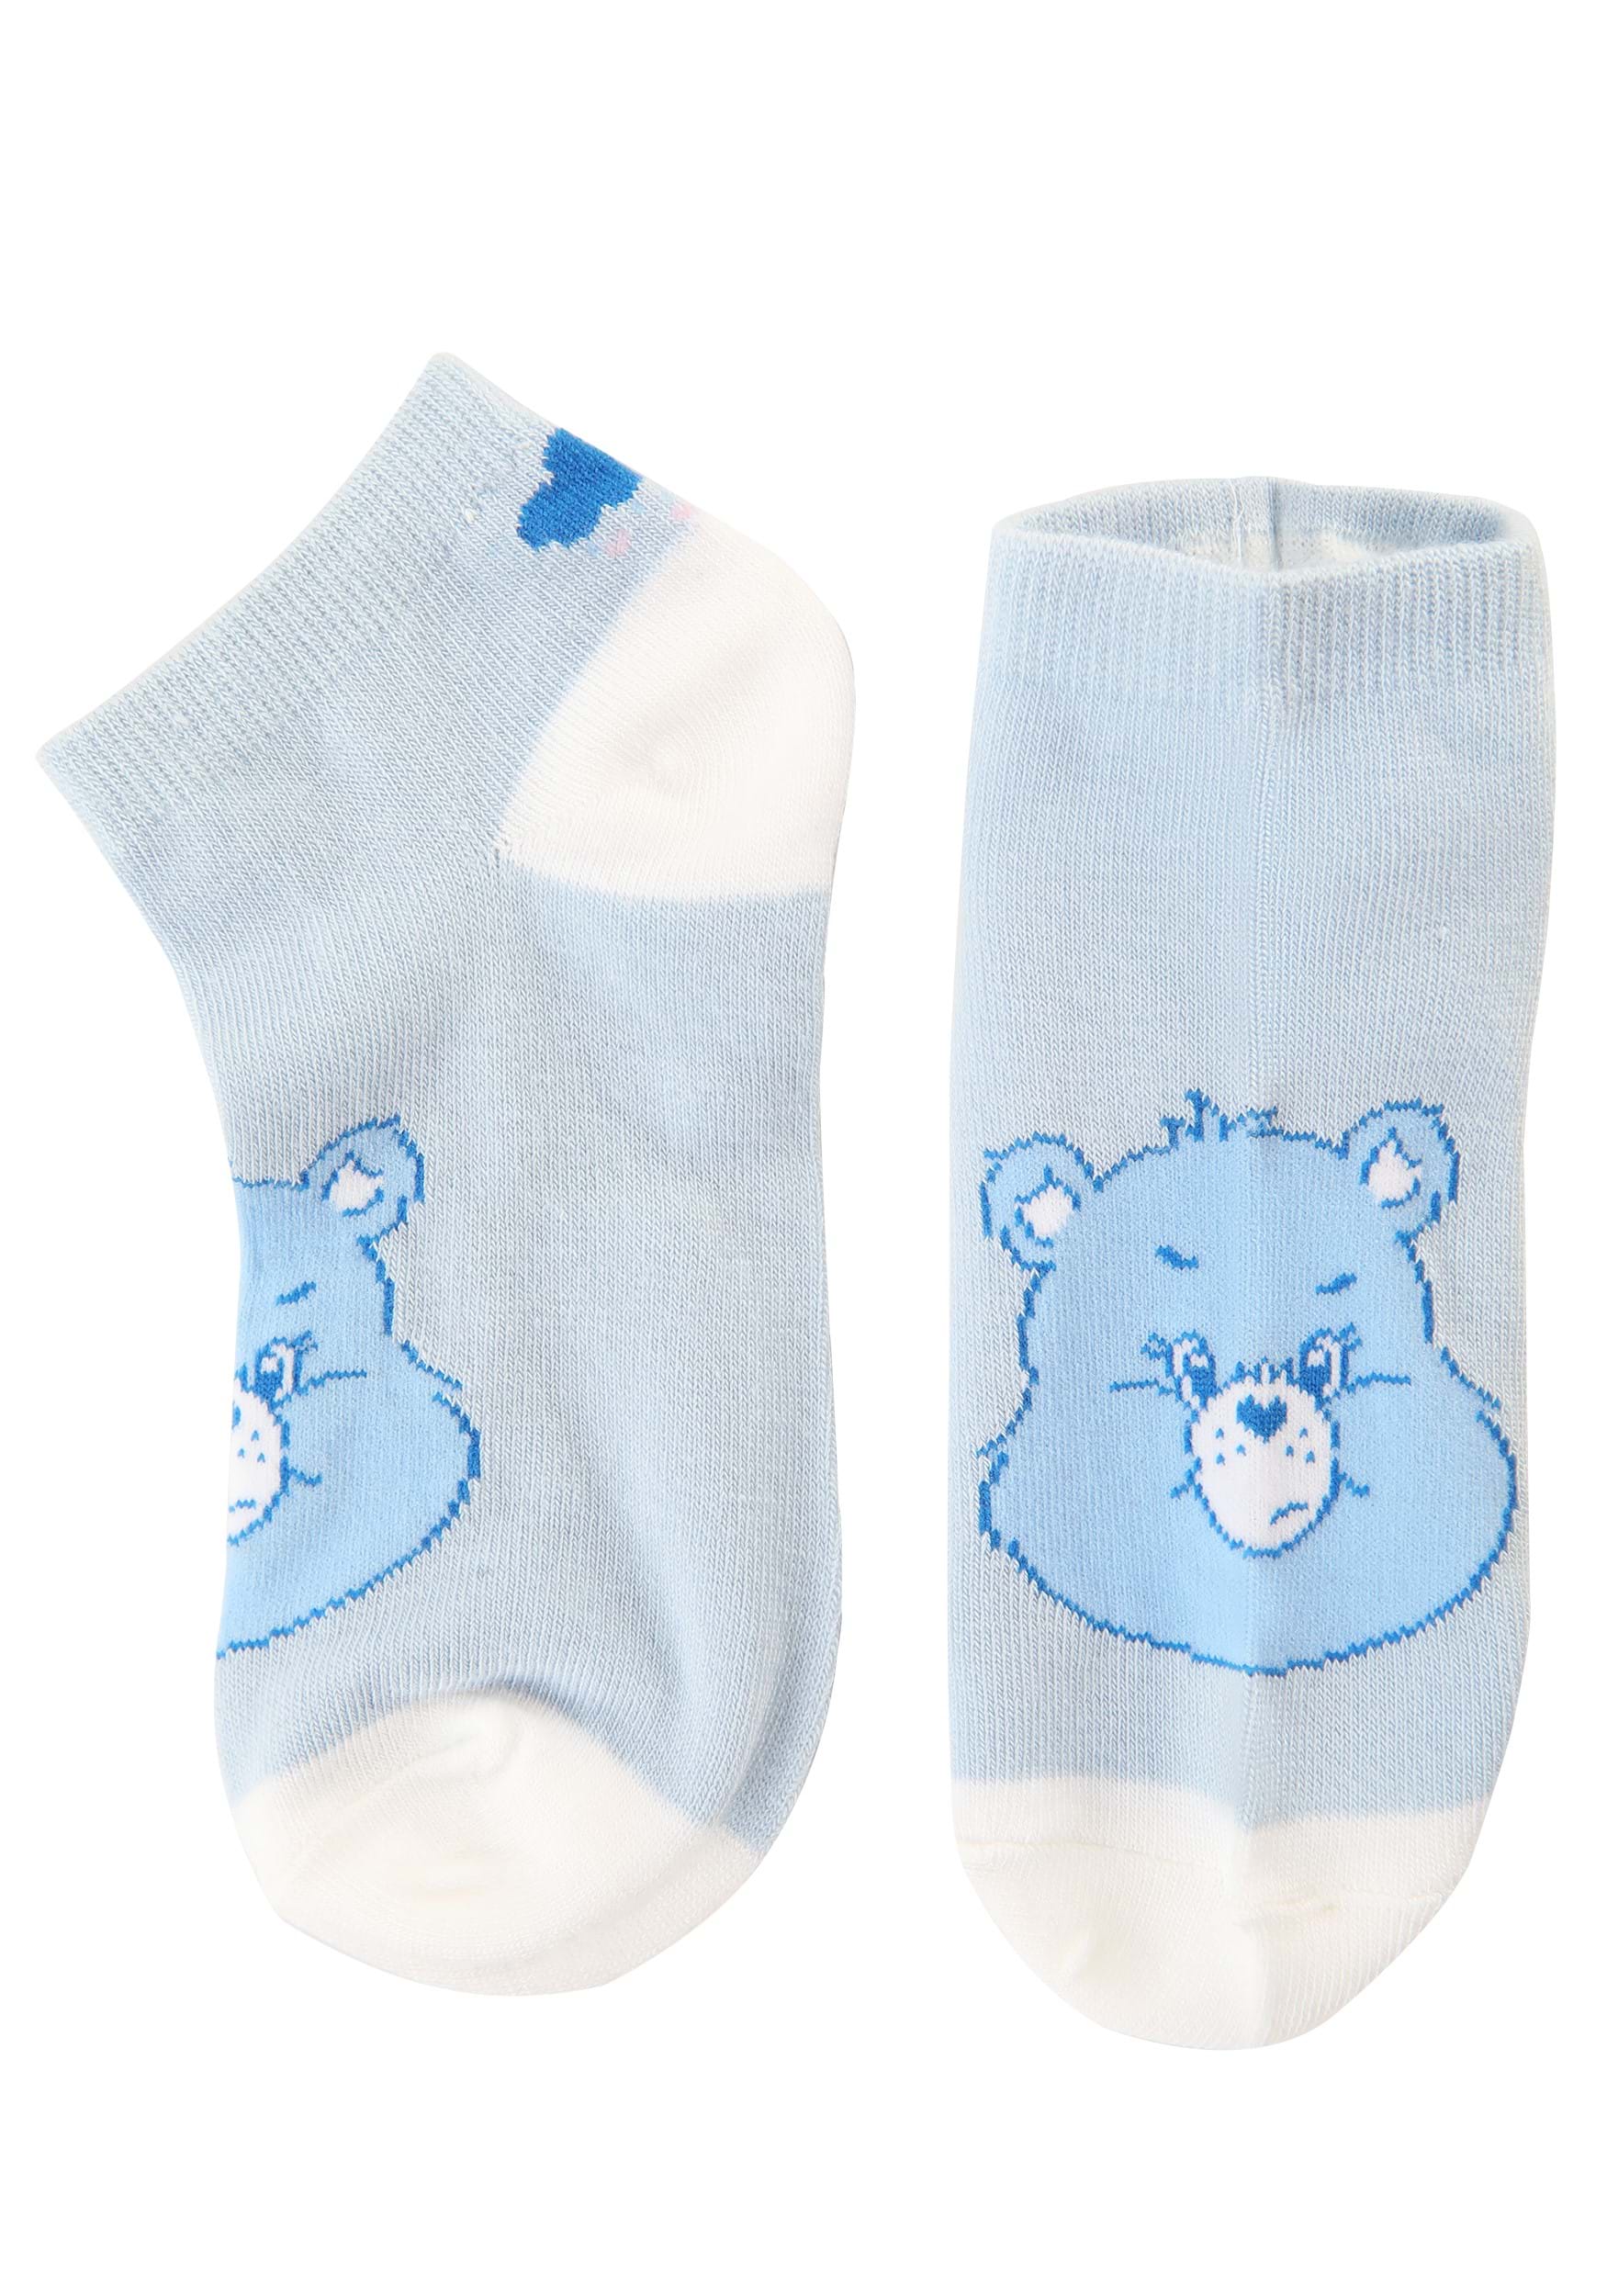 Faces Care Bears Sock Pack , Care Bears Accessories